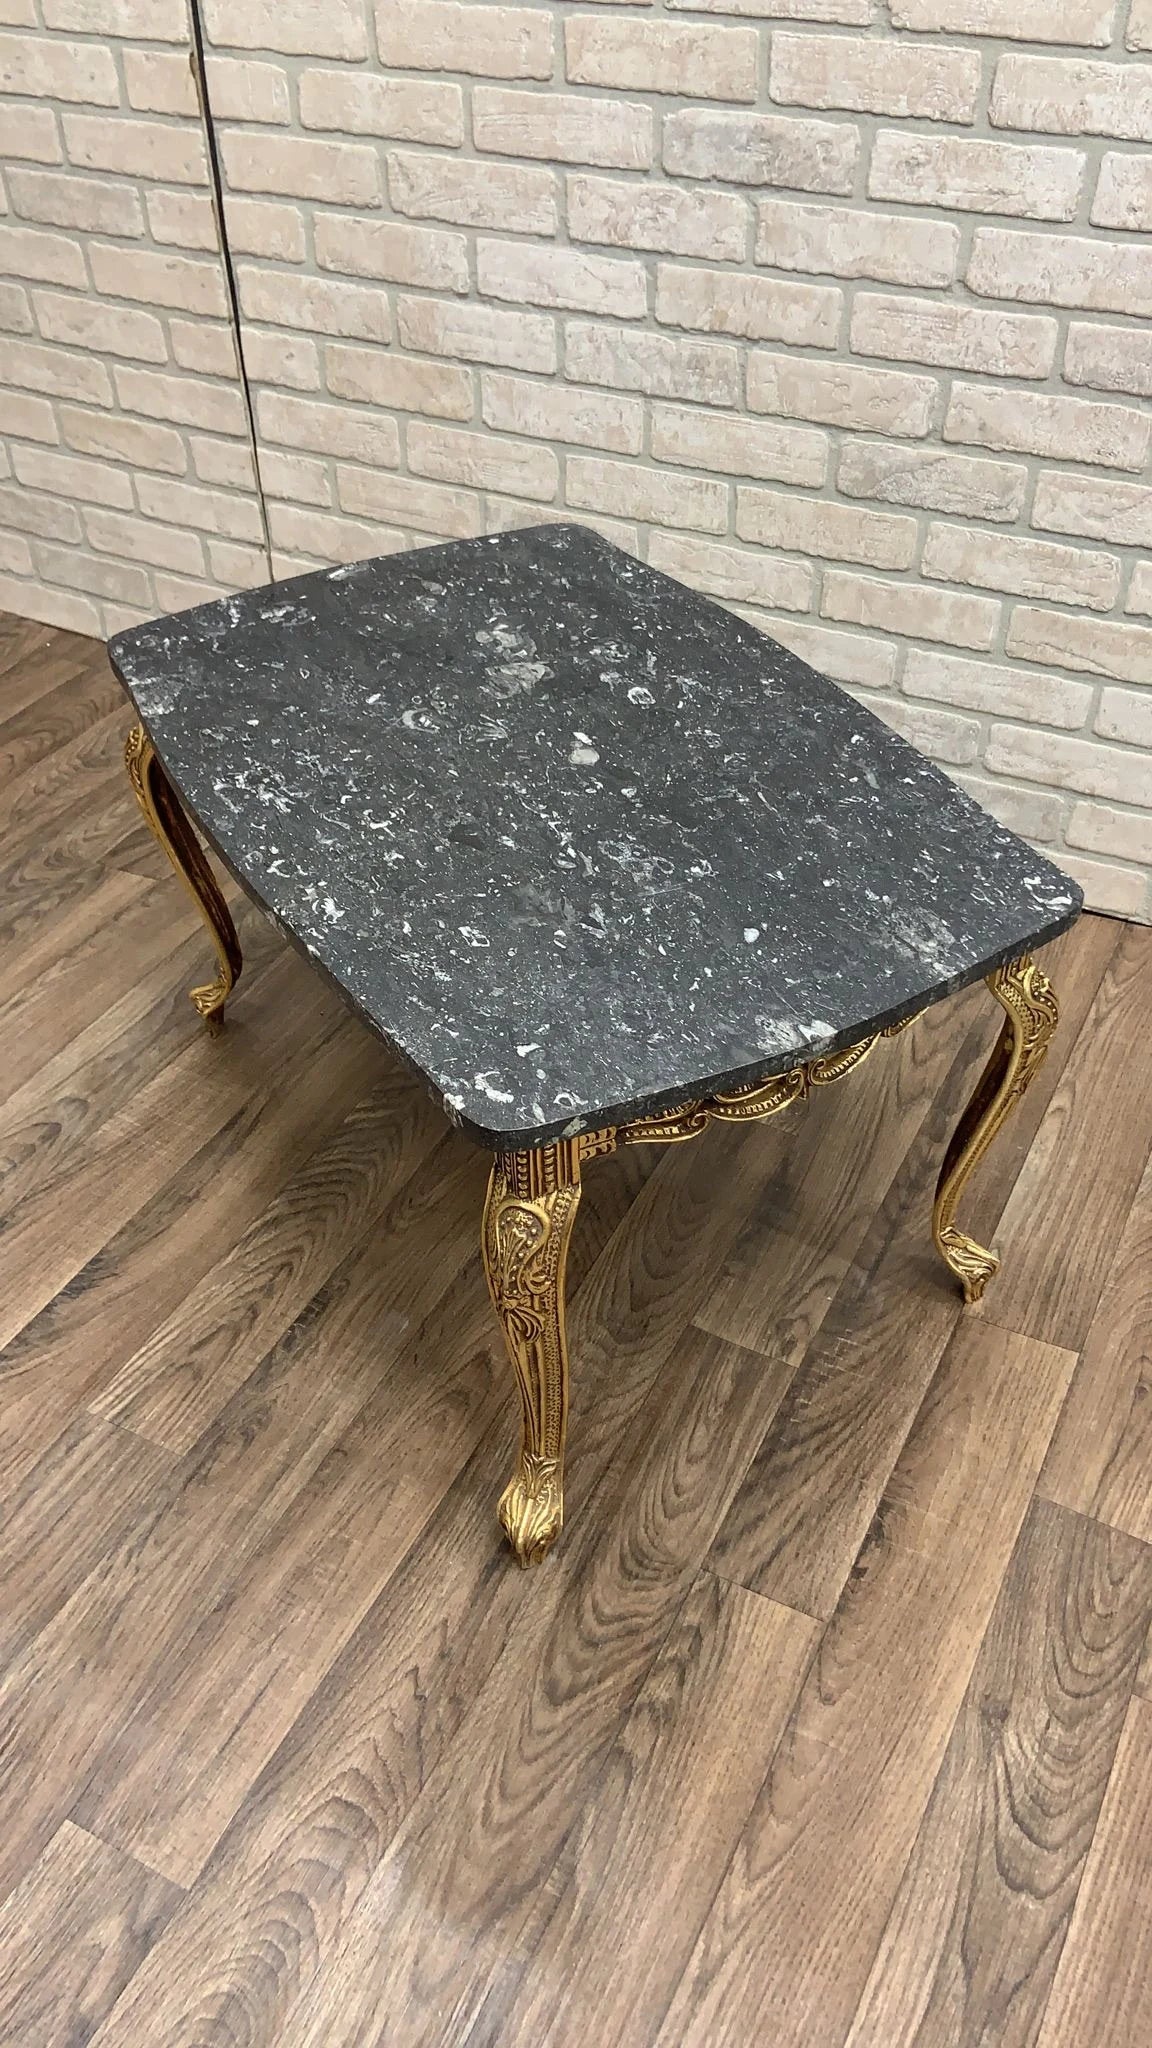 Vintage French Baroque Style Ornate Gilt-Bronze Base Marble Top Coffee Table with Round Marble Top Side-Table - Set of 2